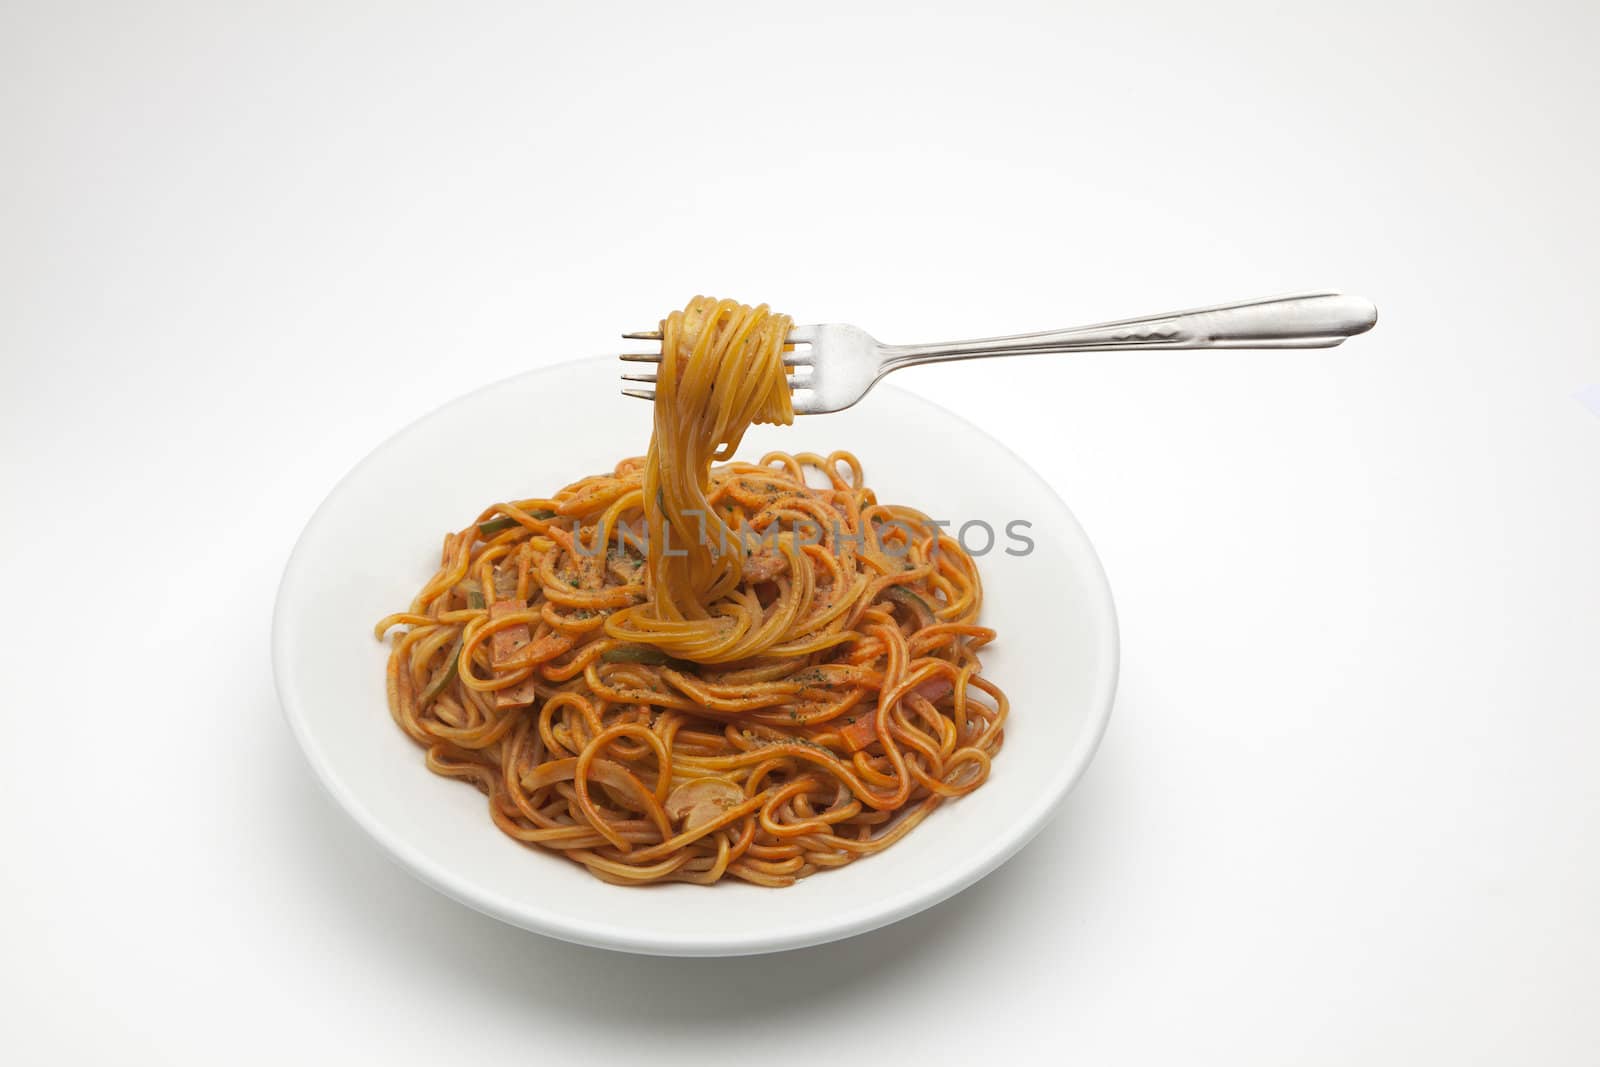 Spaghetti with fork by ram_media_pro